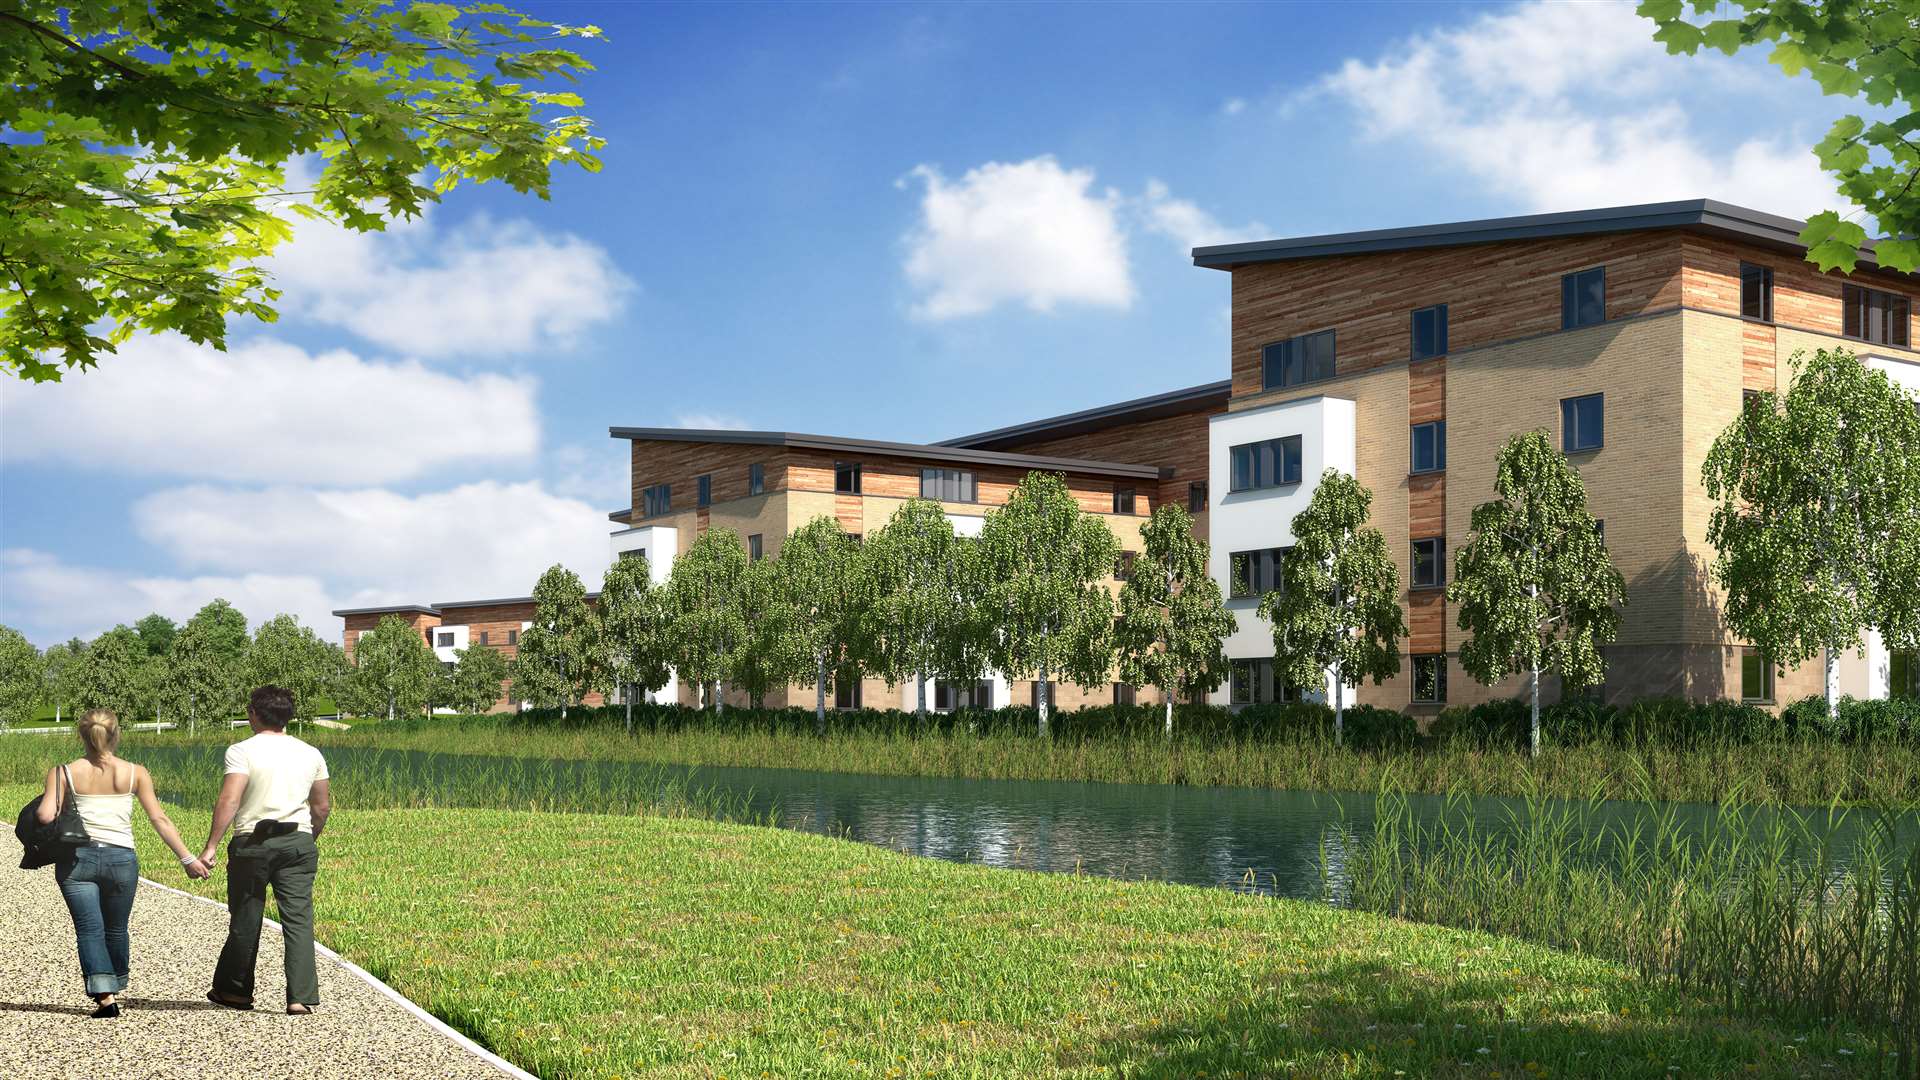 Artists impressions of the planned Kent Medical Campus